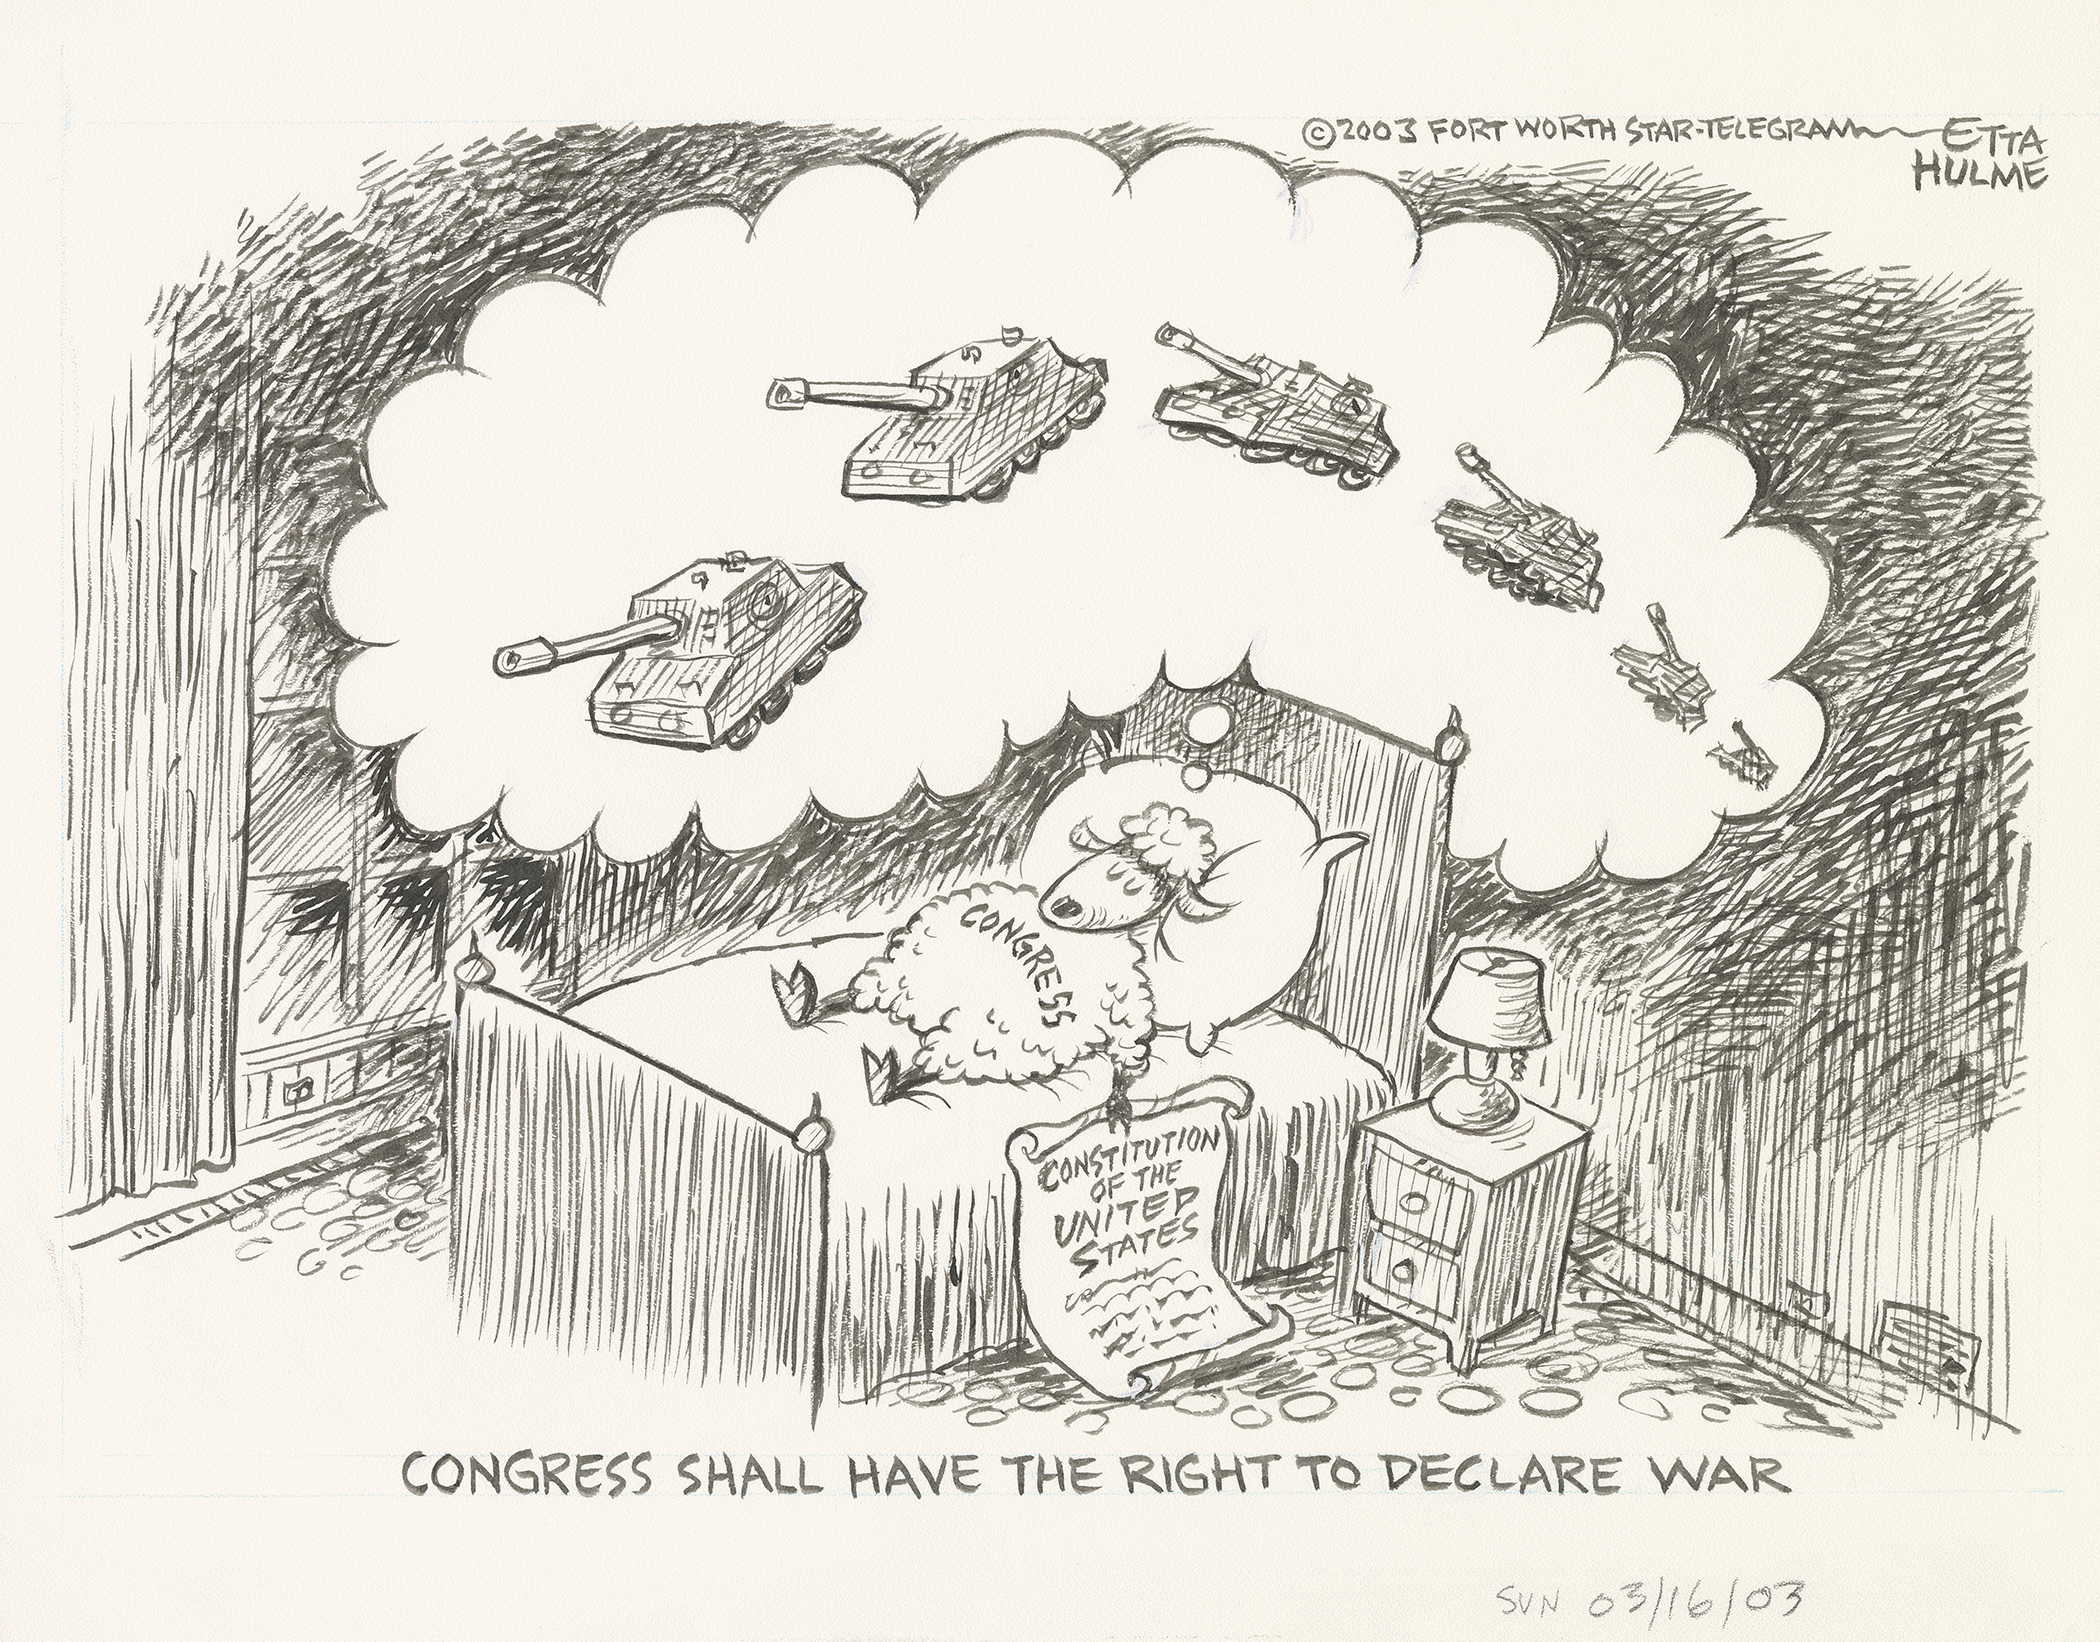 Congress shall have the right to declare war